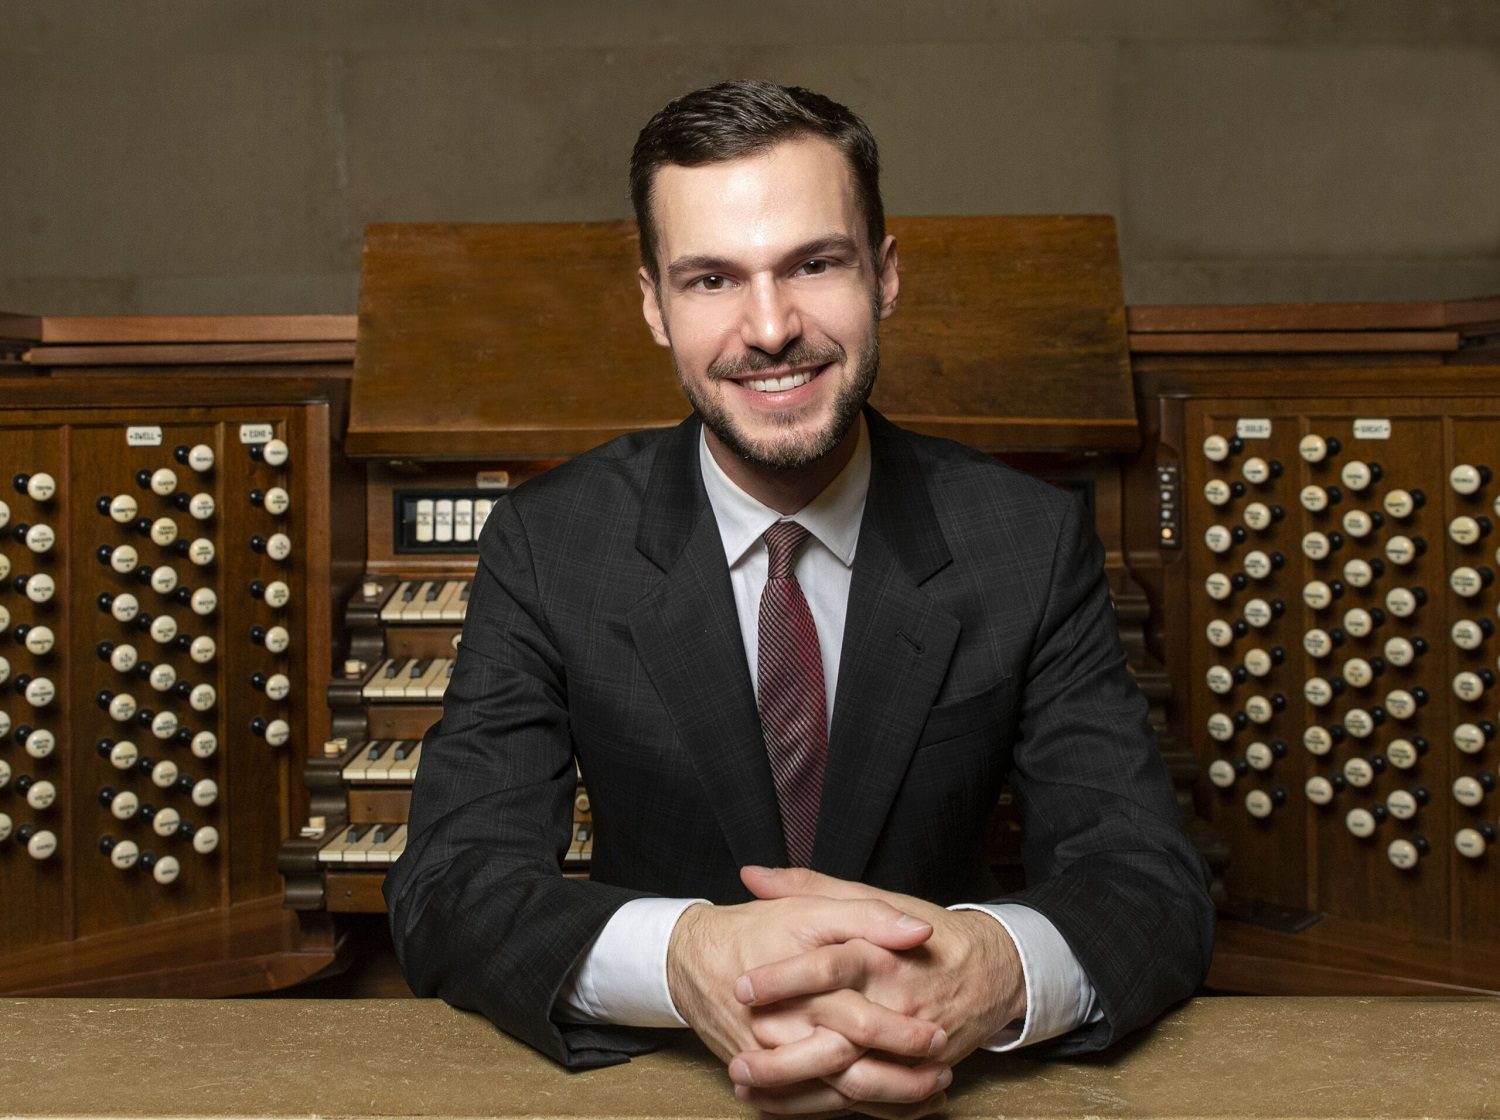 White man sits in front of organ manual